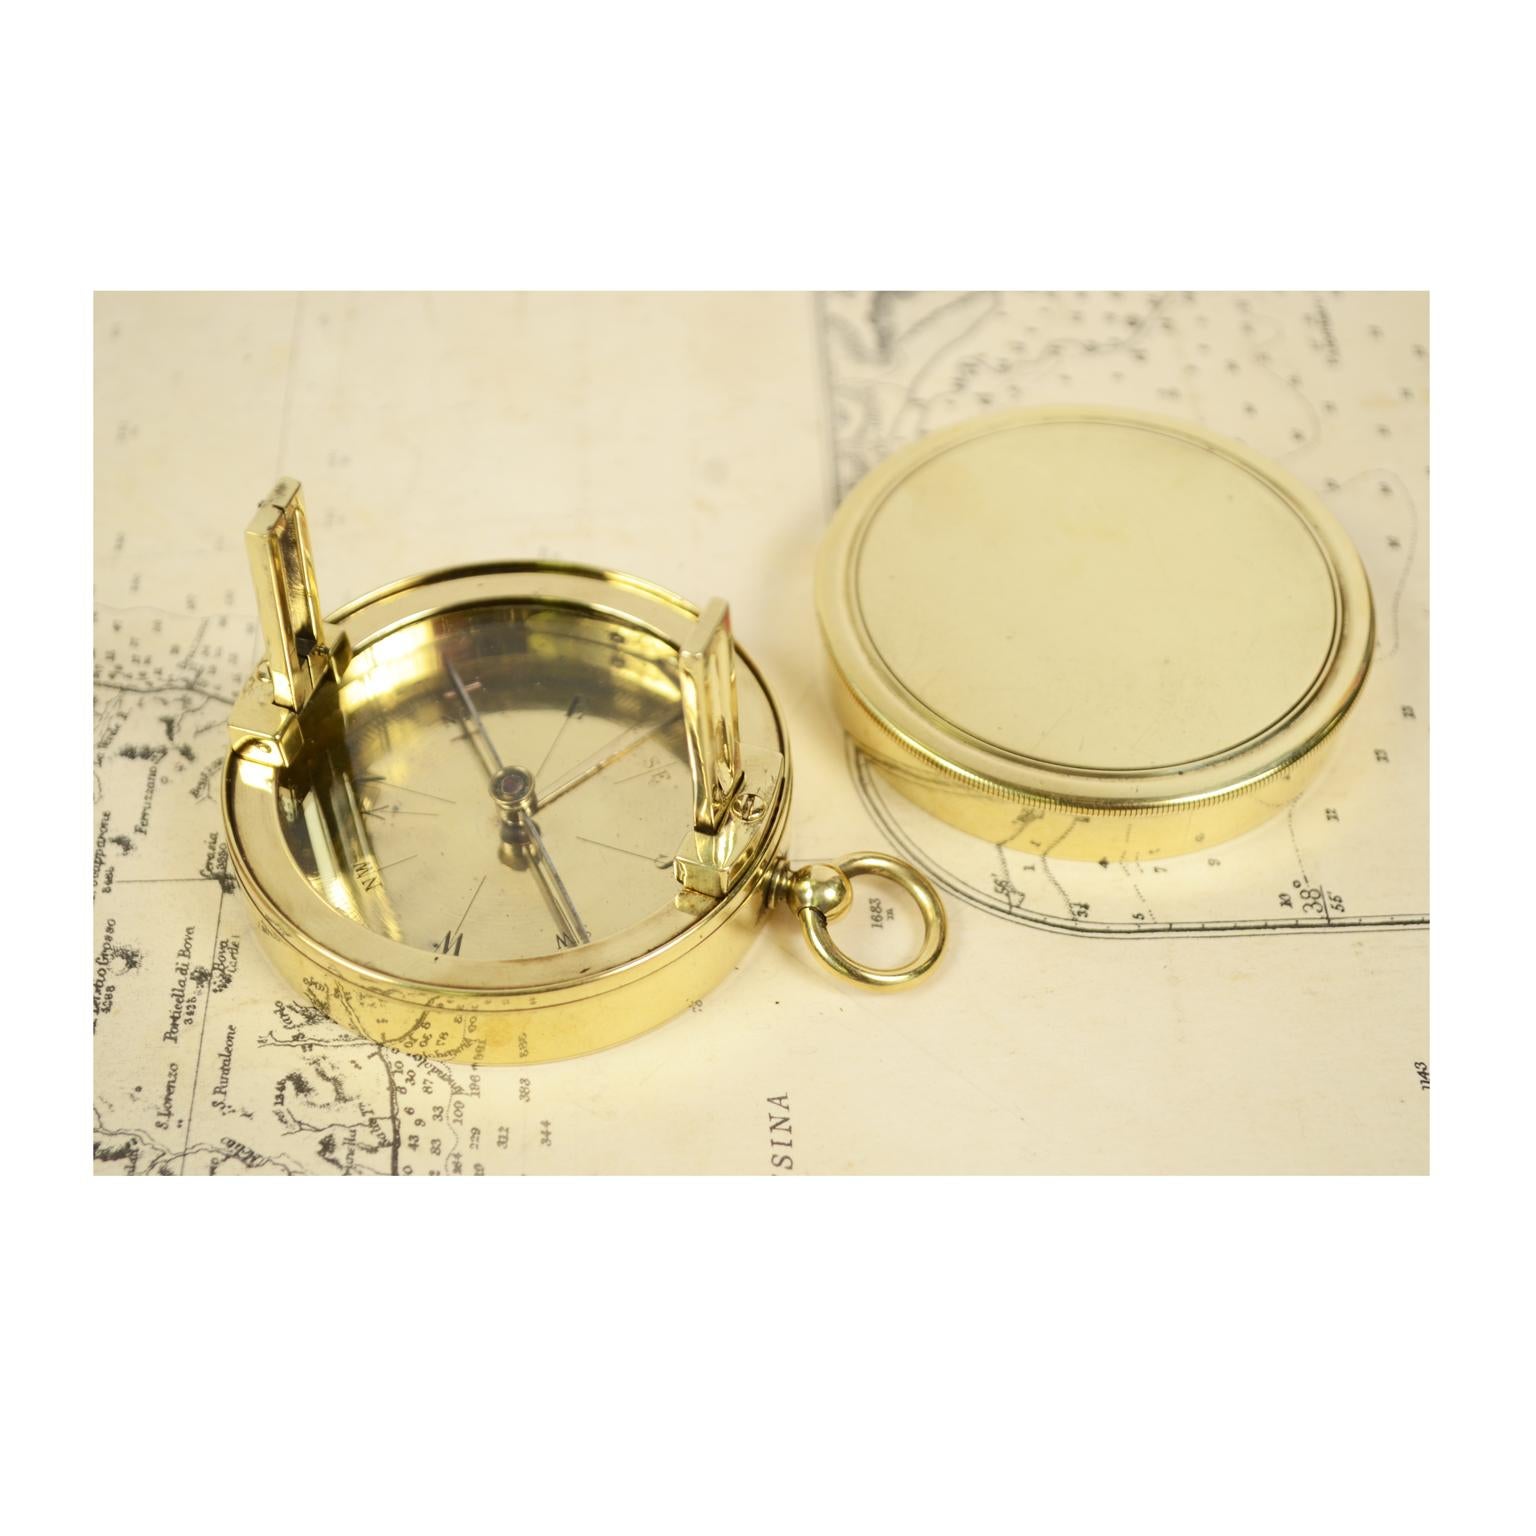 Small French-made brass compass, second half of the 19th century. It is an instrument used for measuring horizontal angles and magnetic orientation. The instrument consists of two movable alidades with targets and a compass complete with a